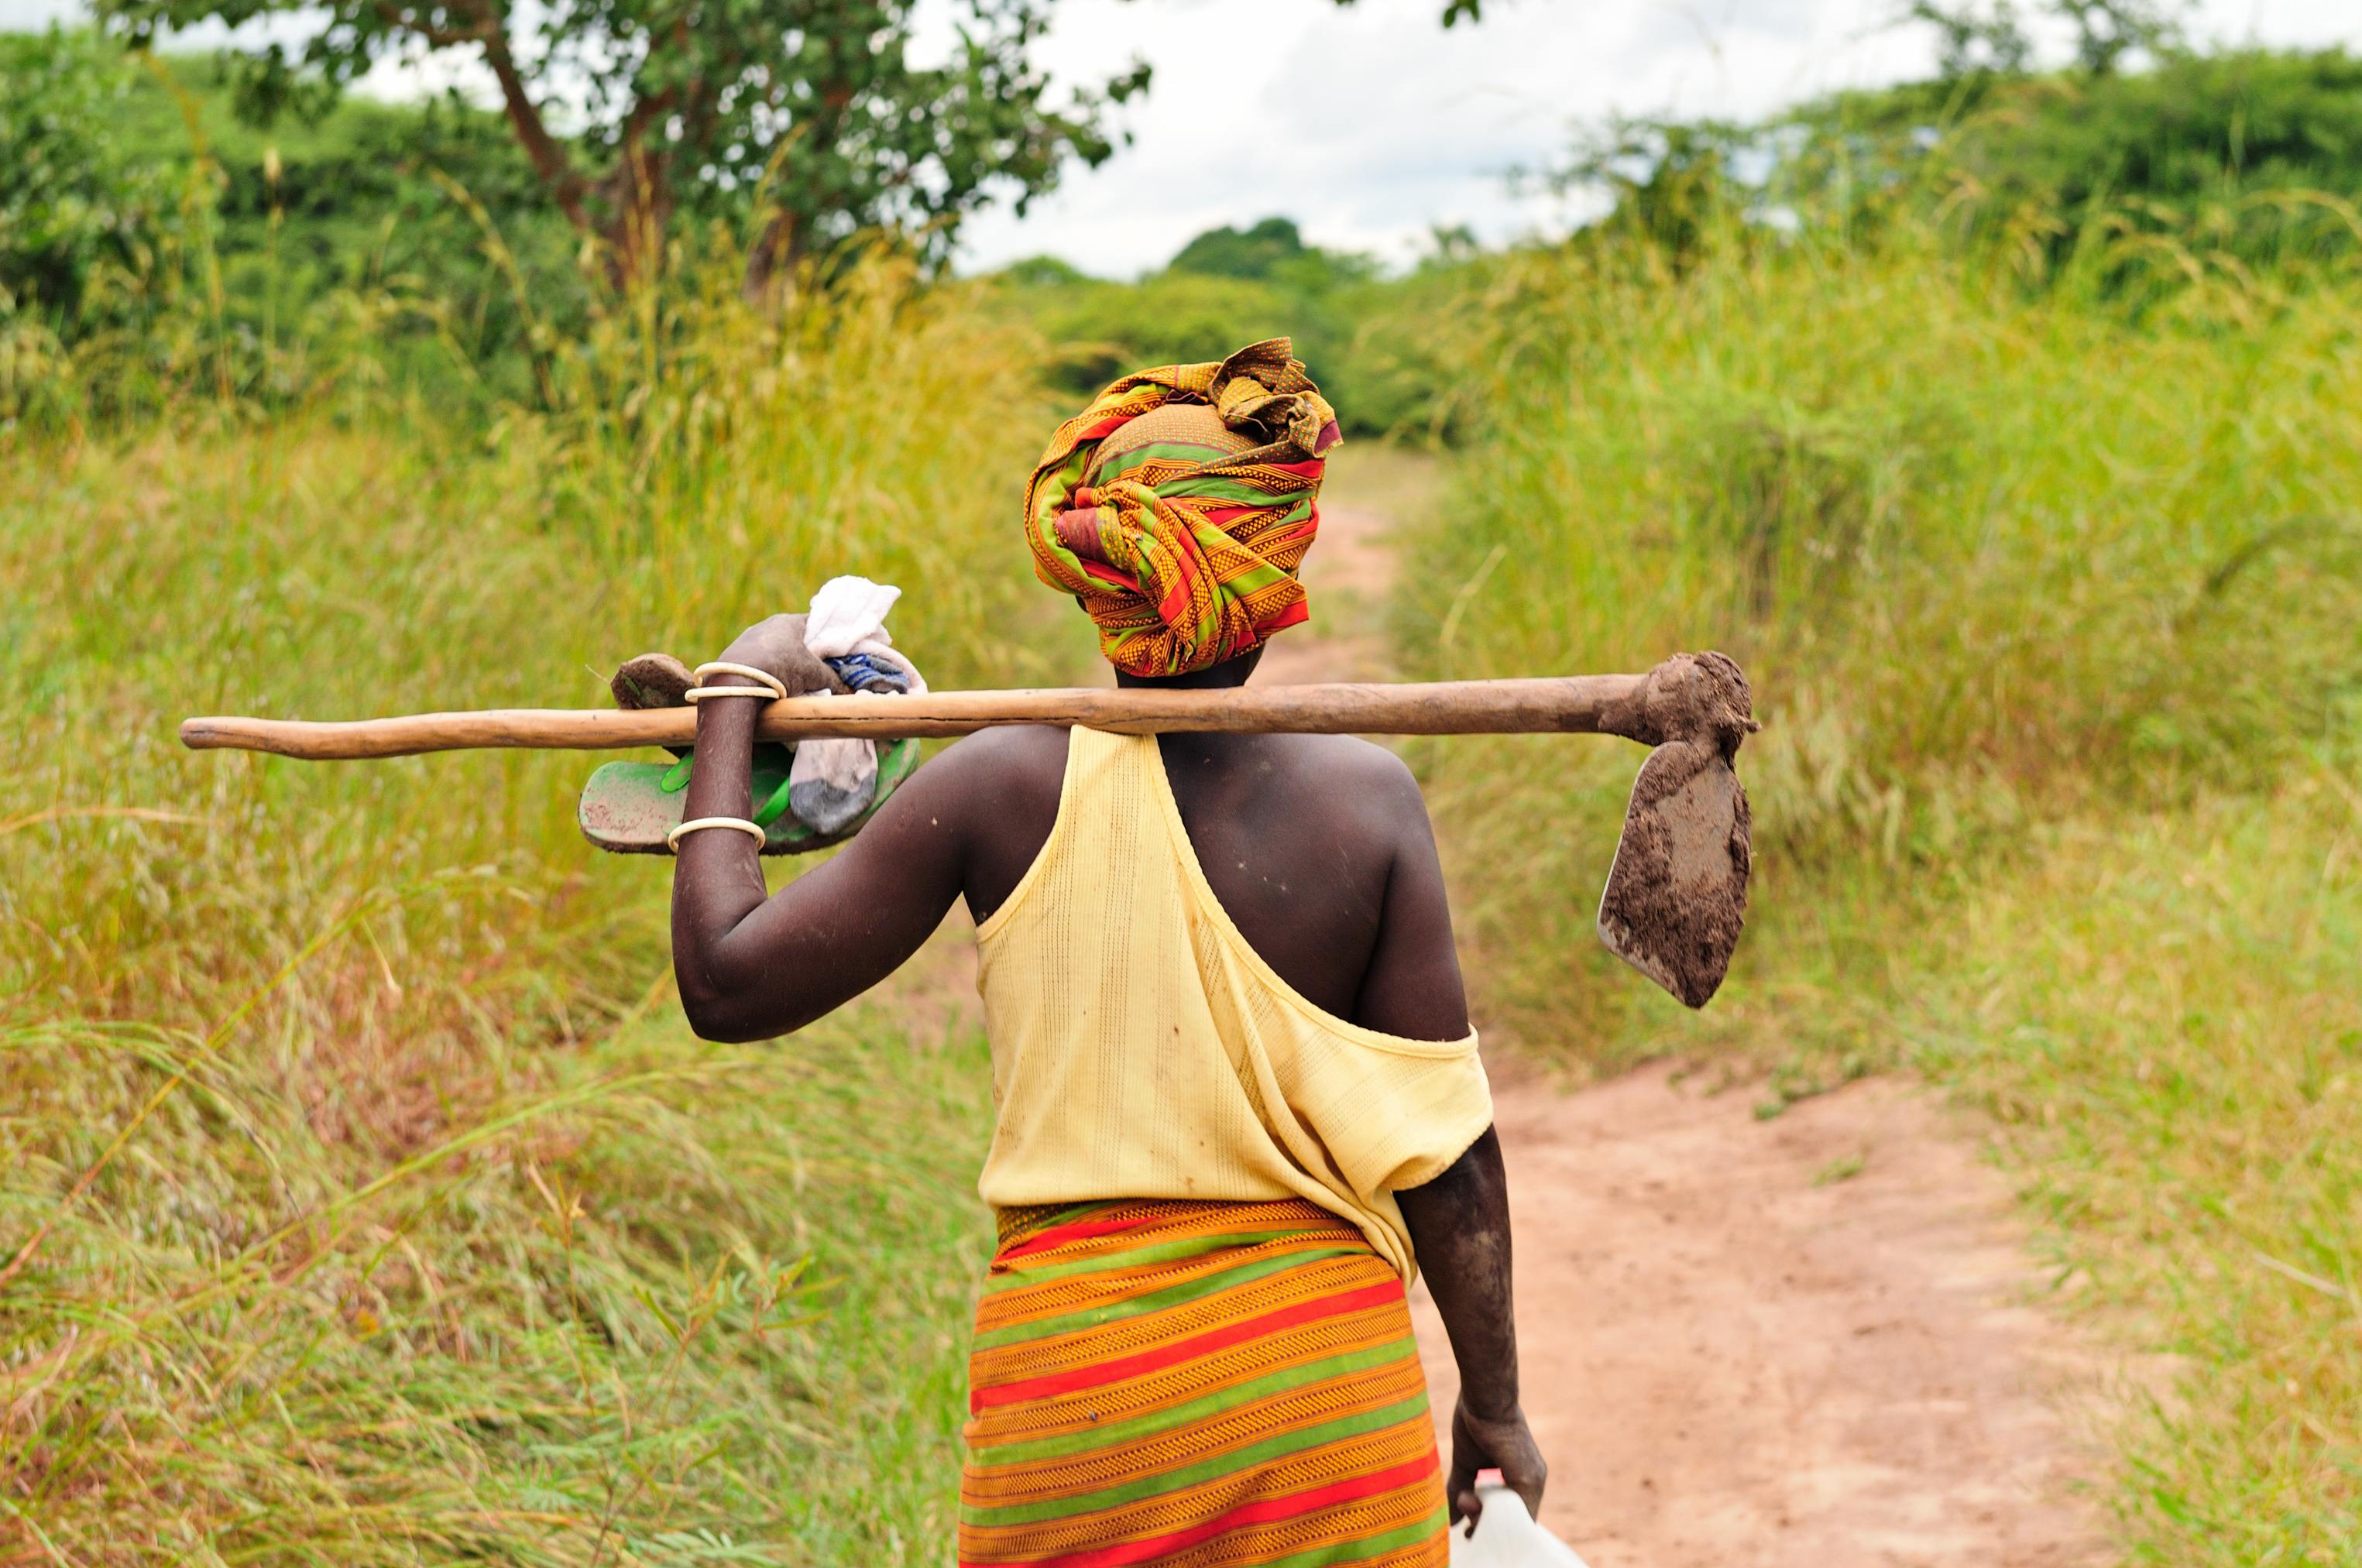 african woman carrying a tool on a grassy path